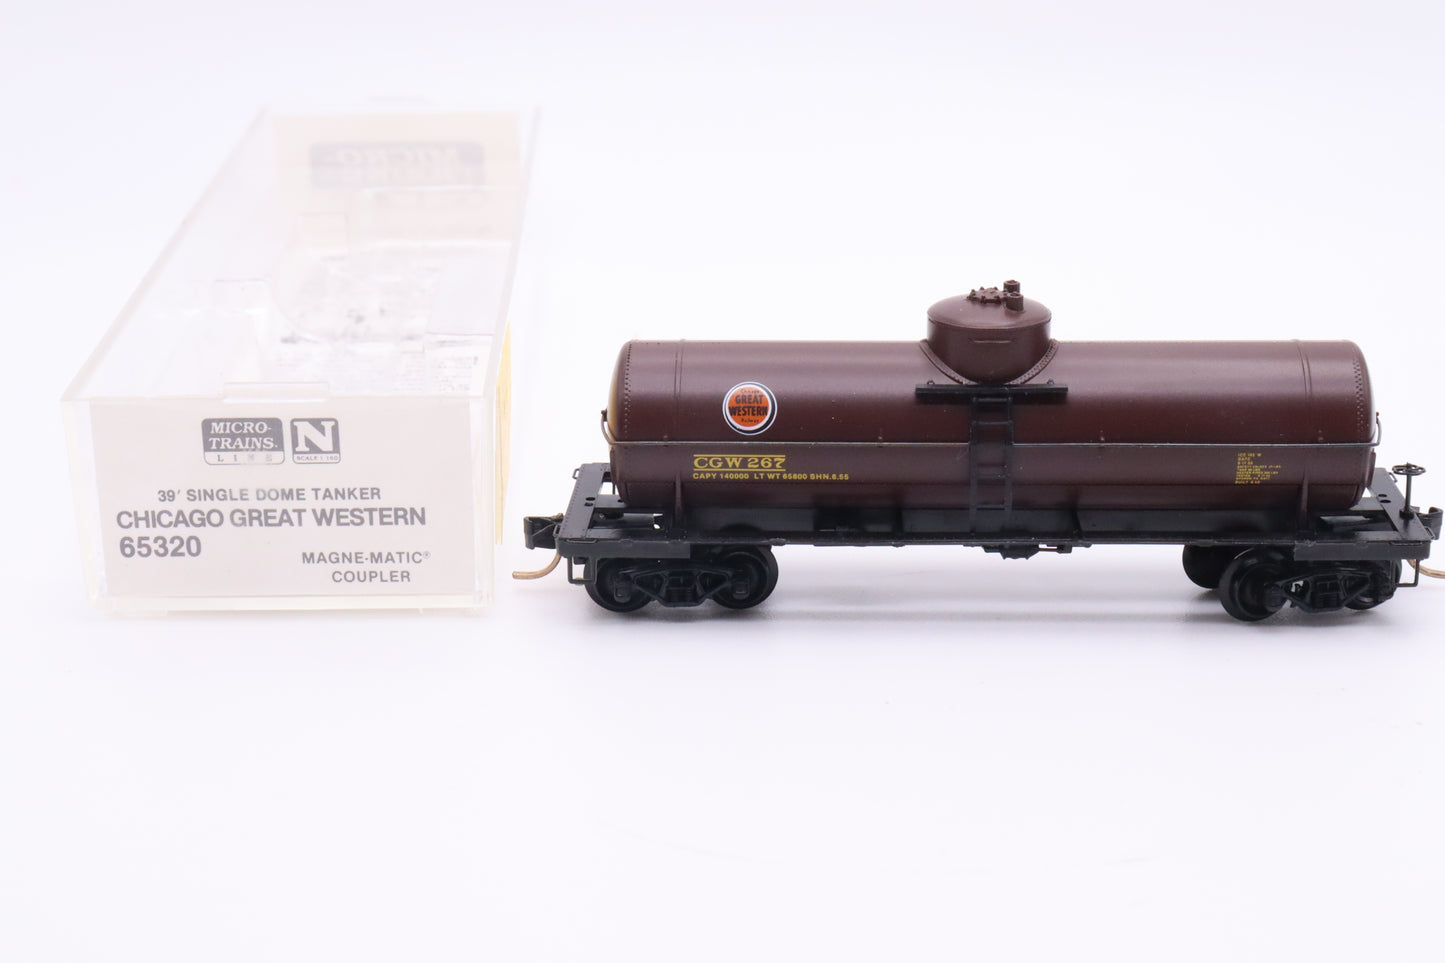 MTL-65320 - 39' Single Dome Tank Car - Chicago Great Western #267